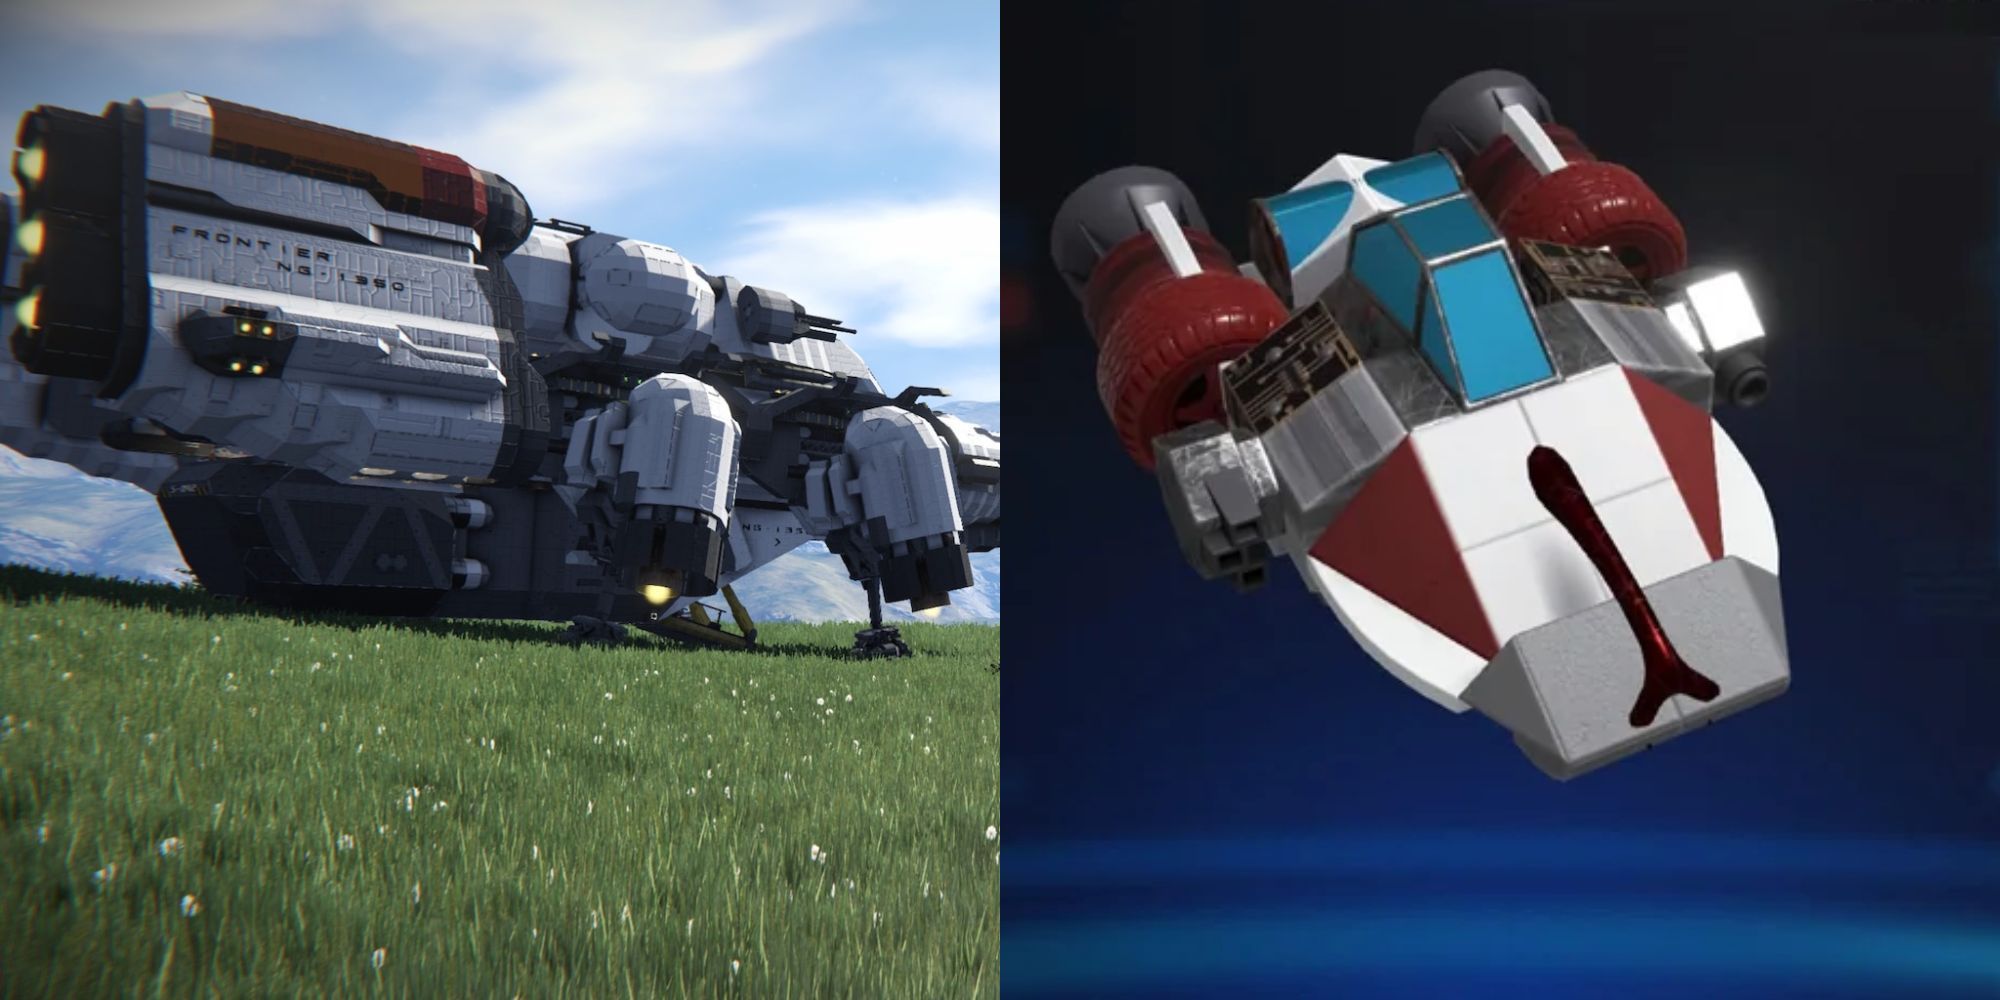 Split image of primarily red and white spacehips from Space Engineers and Kingdom Hearts.